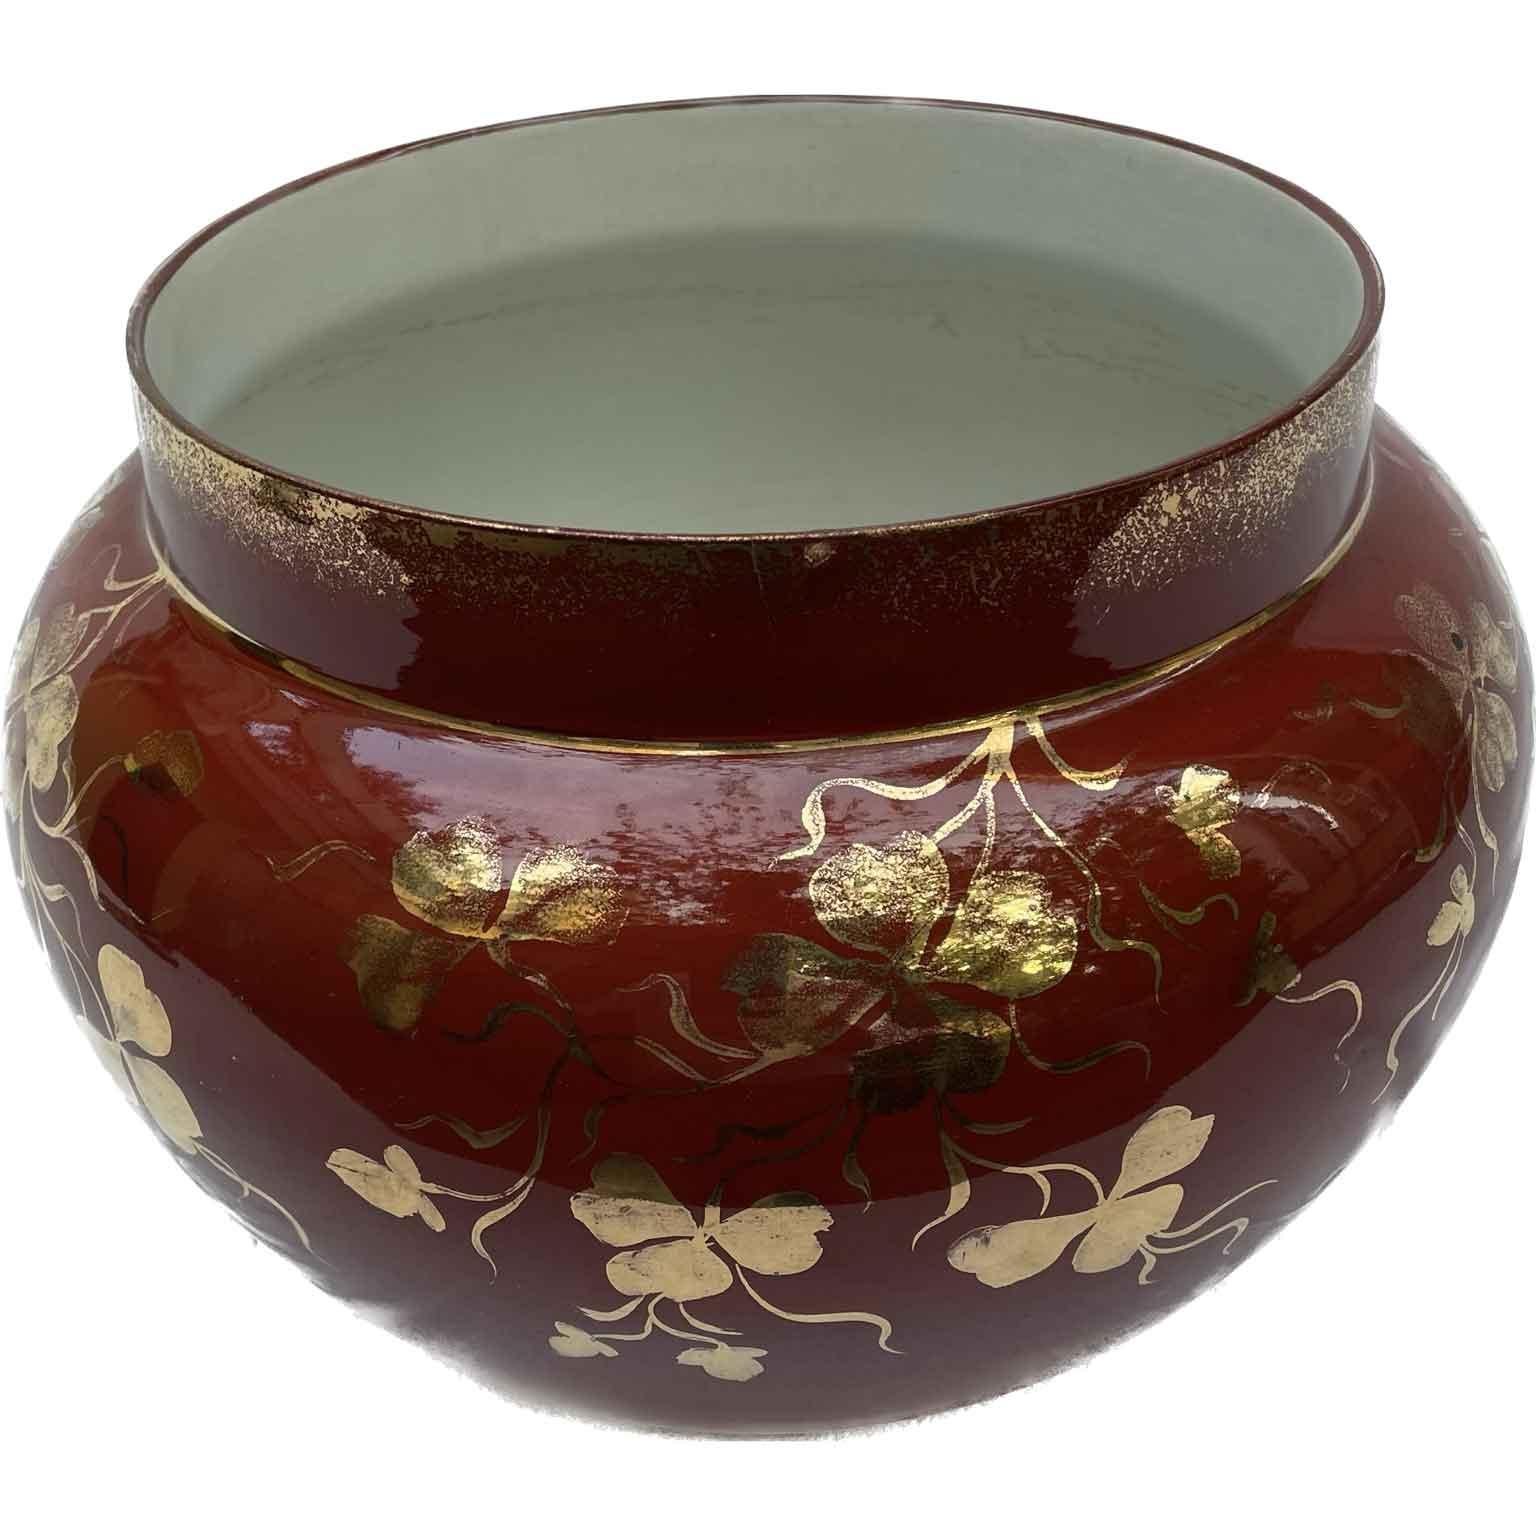 Guido Andlovitz Red hand-painted vase with gold floral motifs, Gold Verbanum Stone SCI Laveno of flattened spherical shape with a pot-bellied body and the wide neck formed by a straight step of 3.5 cm, which also makes it suitable for use as a